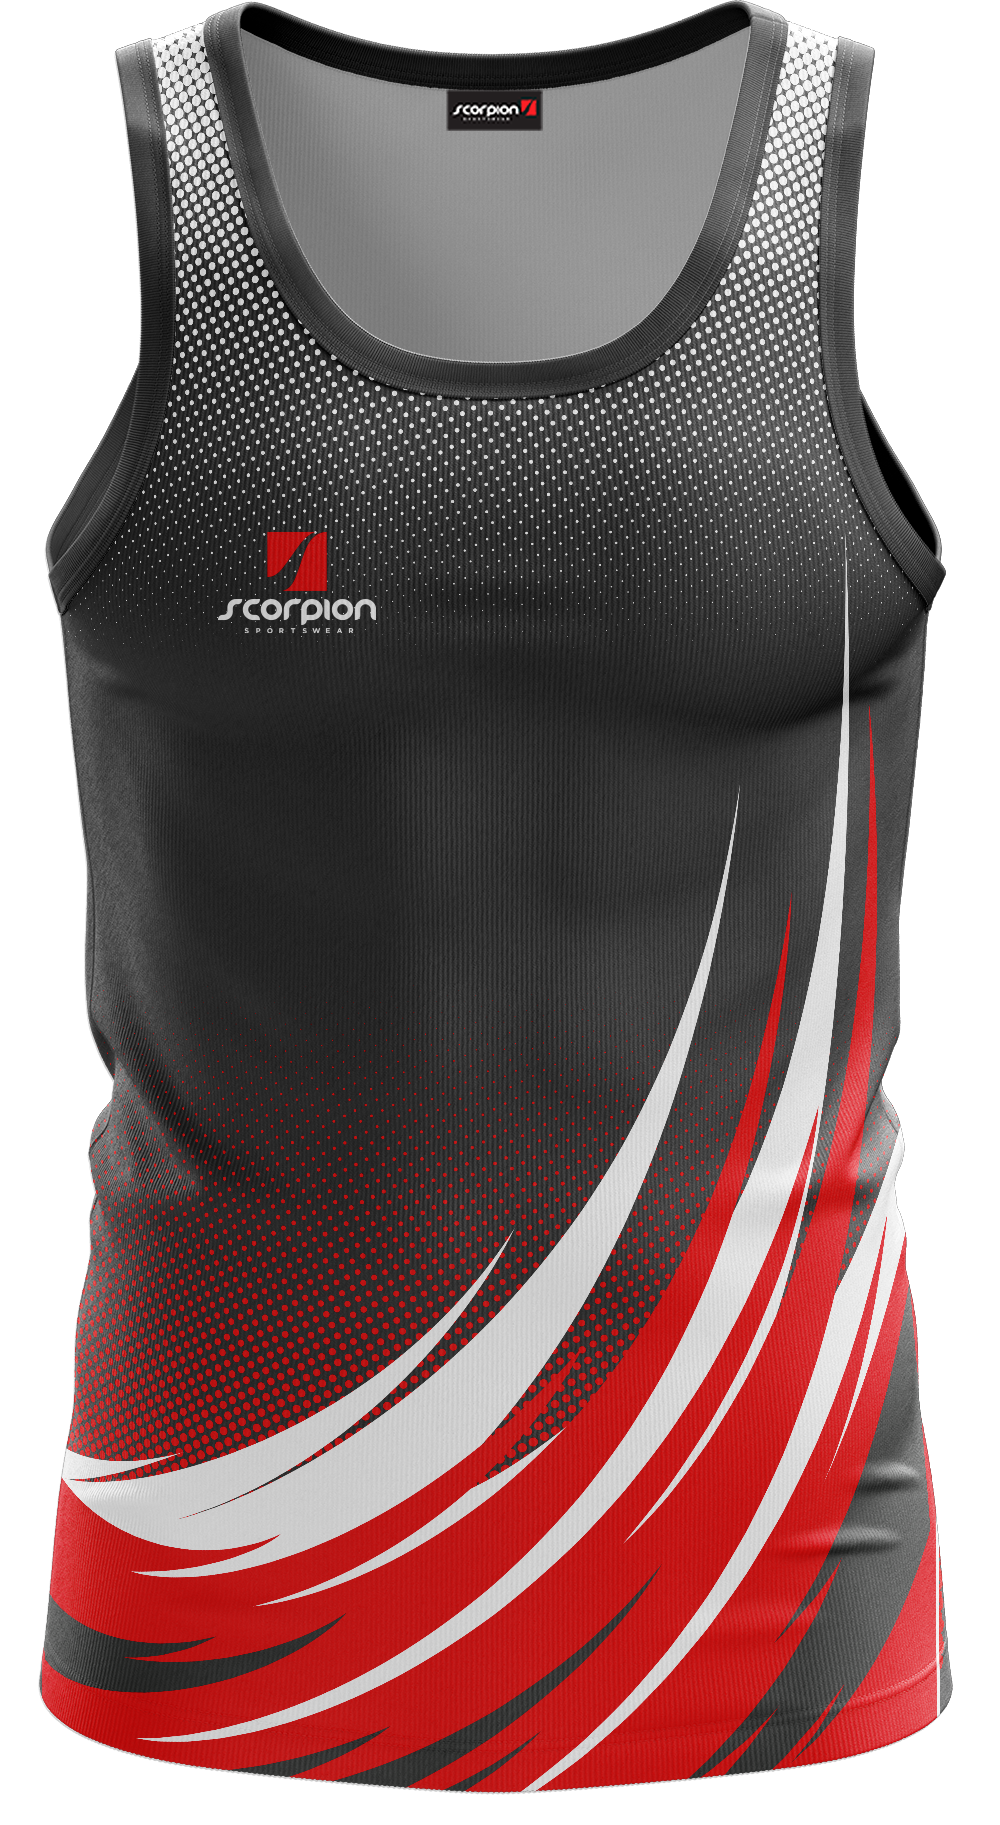 Scorpion Vests Pattern 5 - Charcoal/Red/White